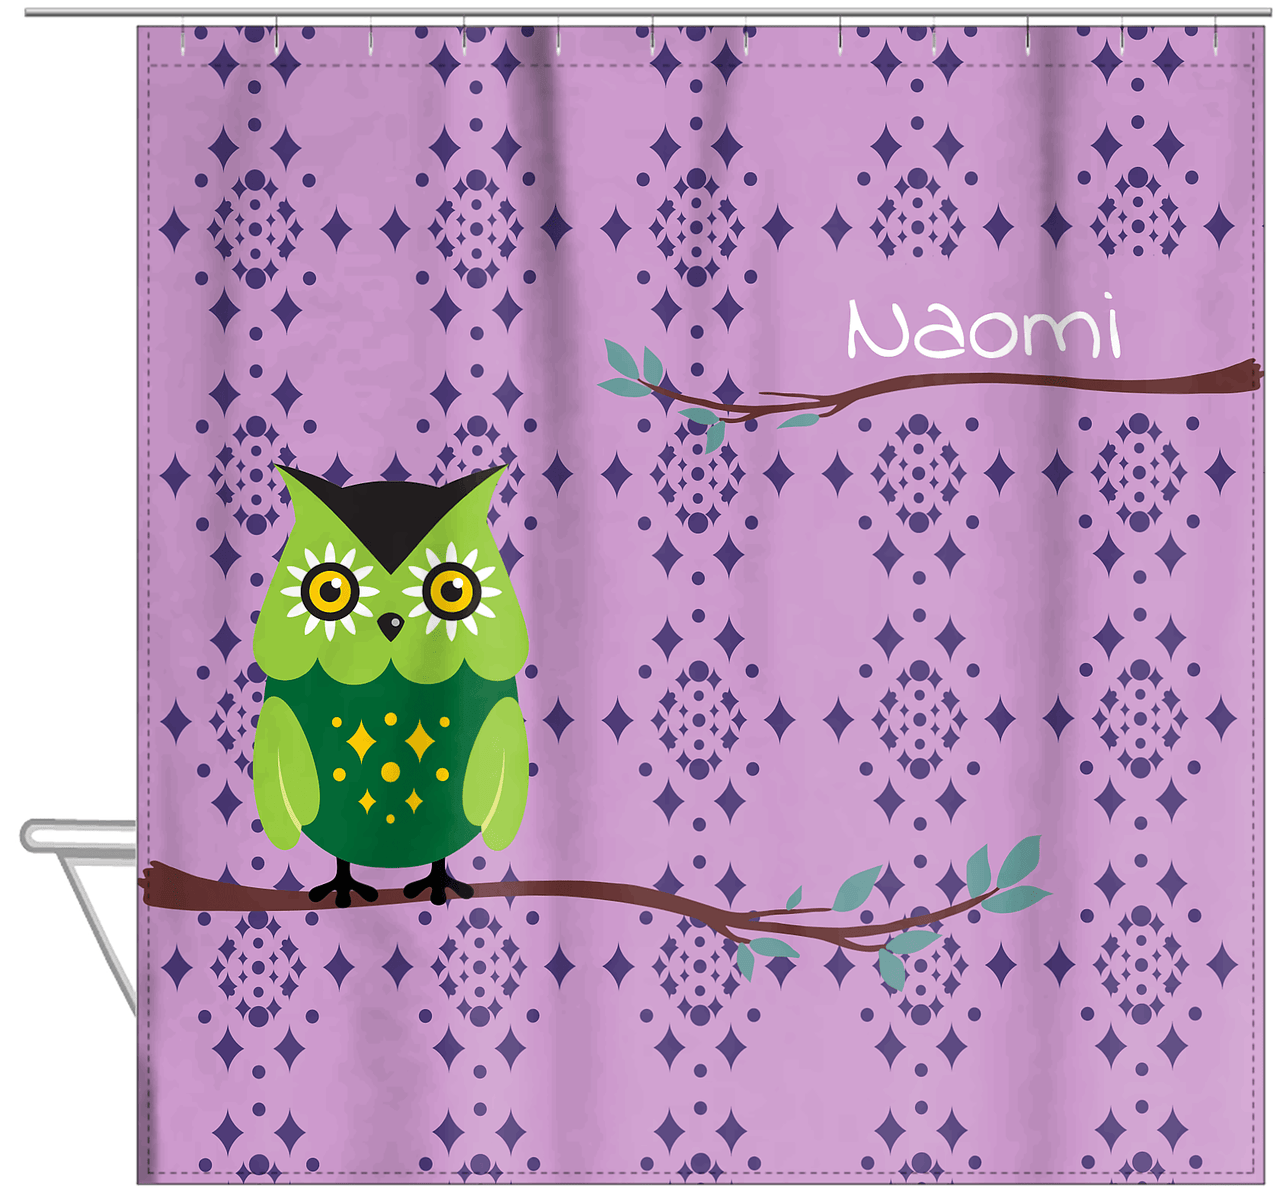 Personalized Owl Shower Curtain I - Owl 08 - Pink Background - Hanging View